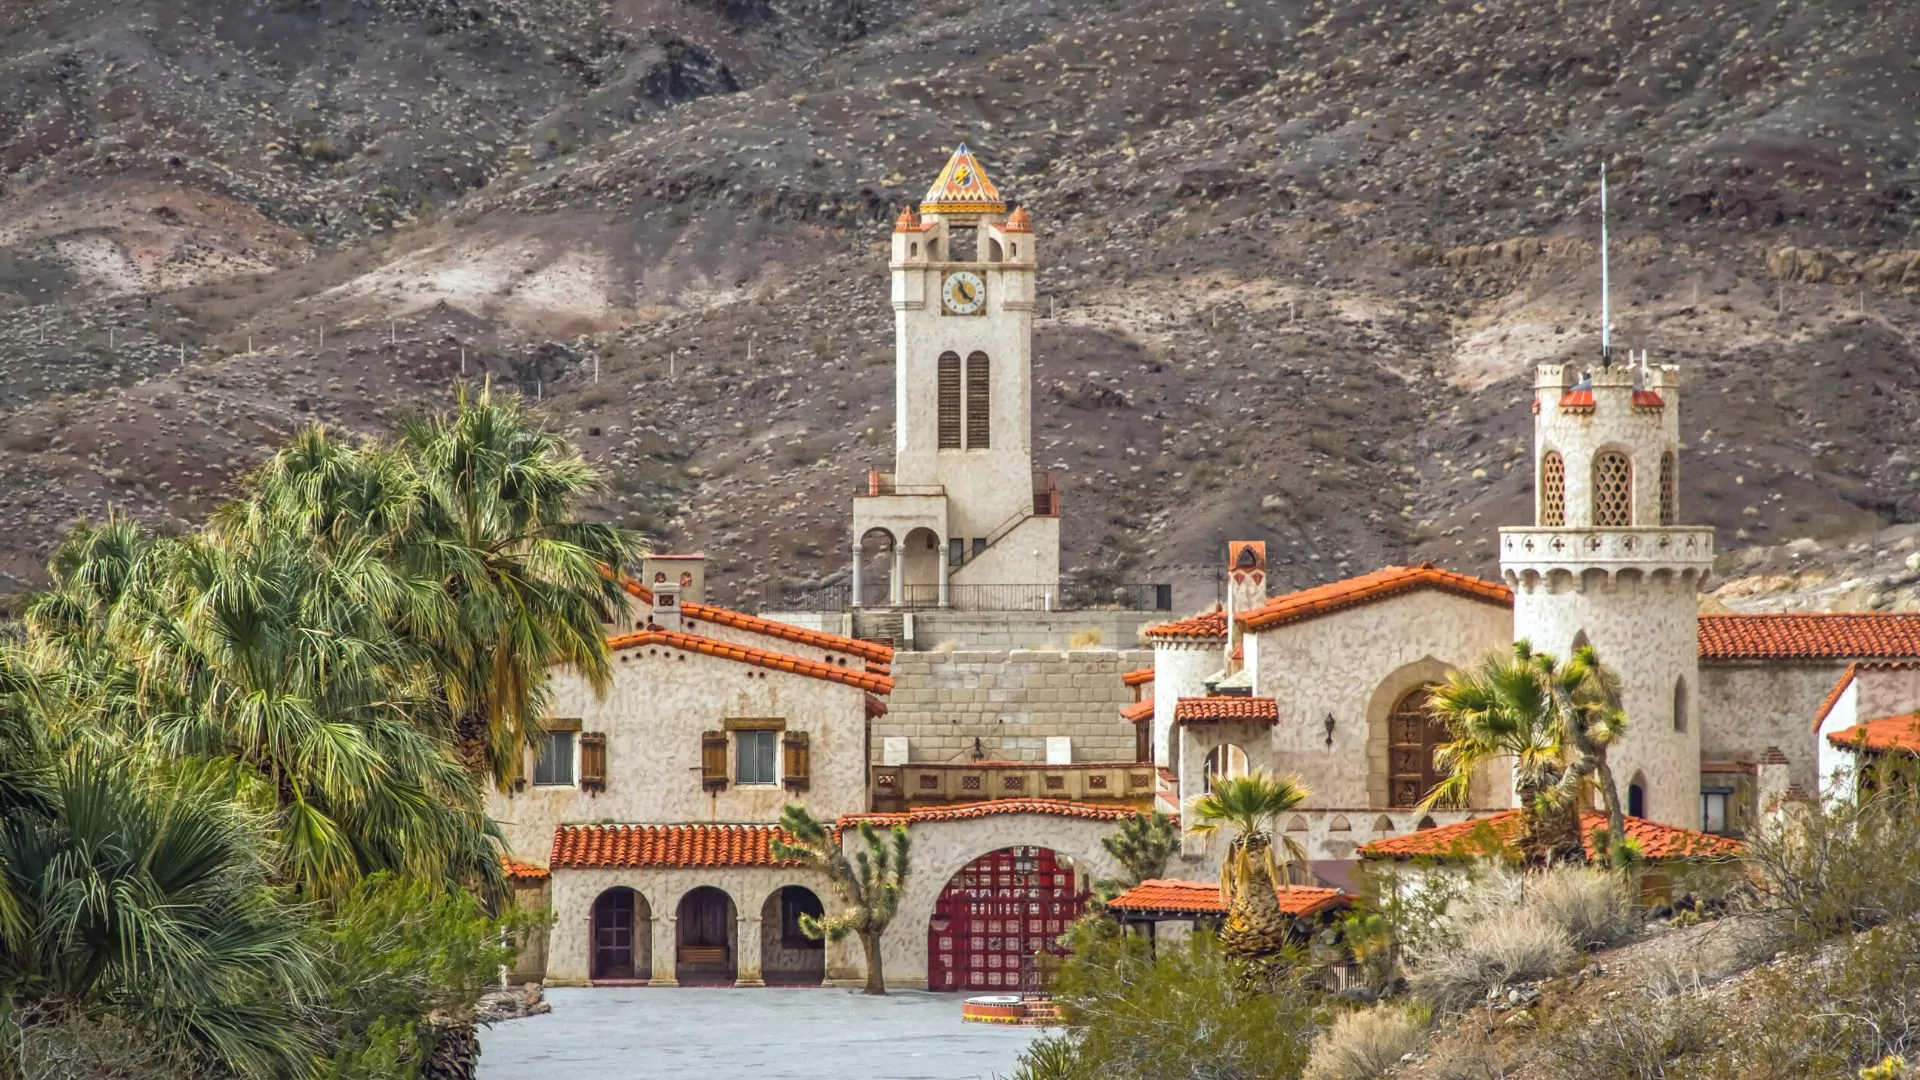 Spanish revival-style buildings with red tiled roofs poke up from desert landscape among lush palm trees and decorative fountains